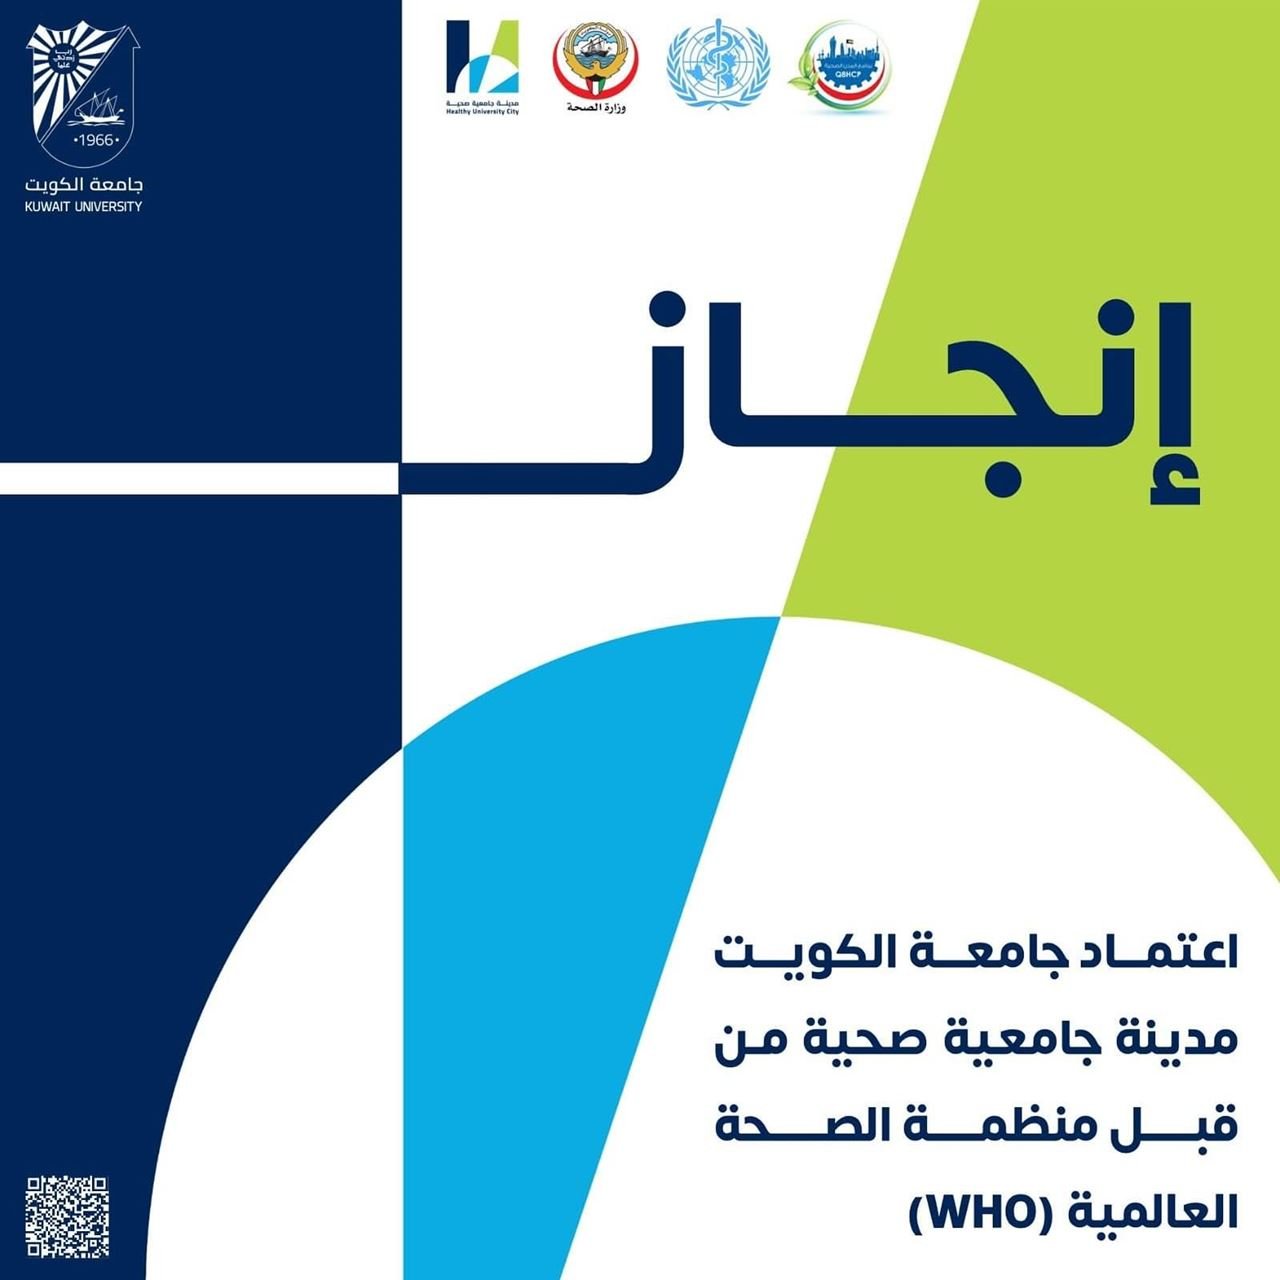 Kuwait University Accredited as Healthy University City by WHO